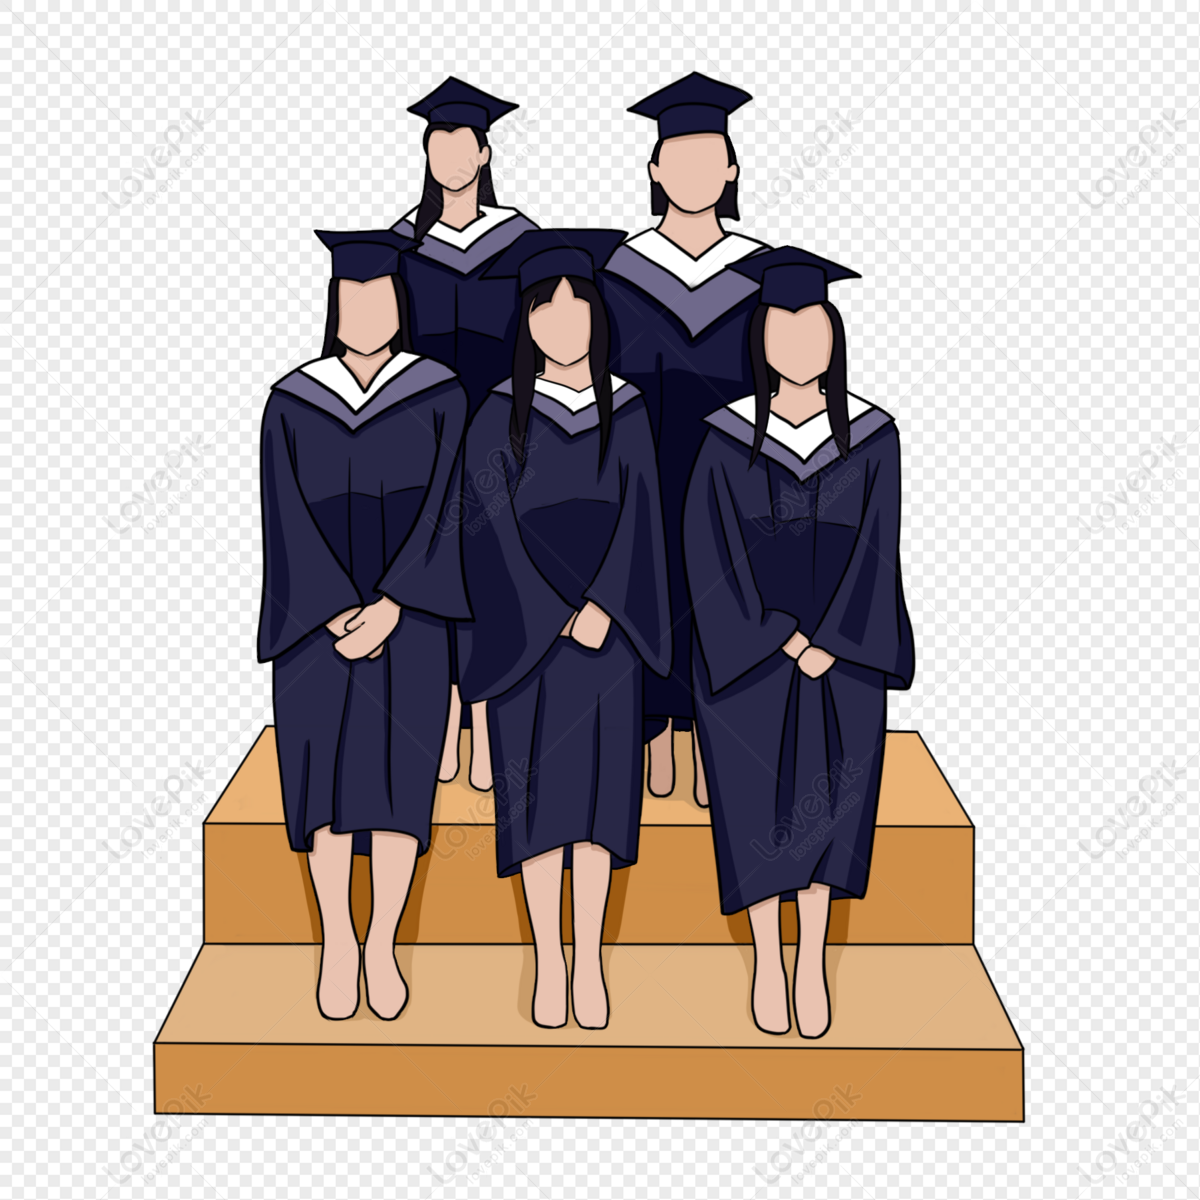 Information About Academic Gowns – The Intercollegiate Registry of Academic  Costume